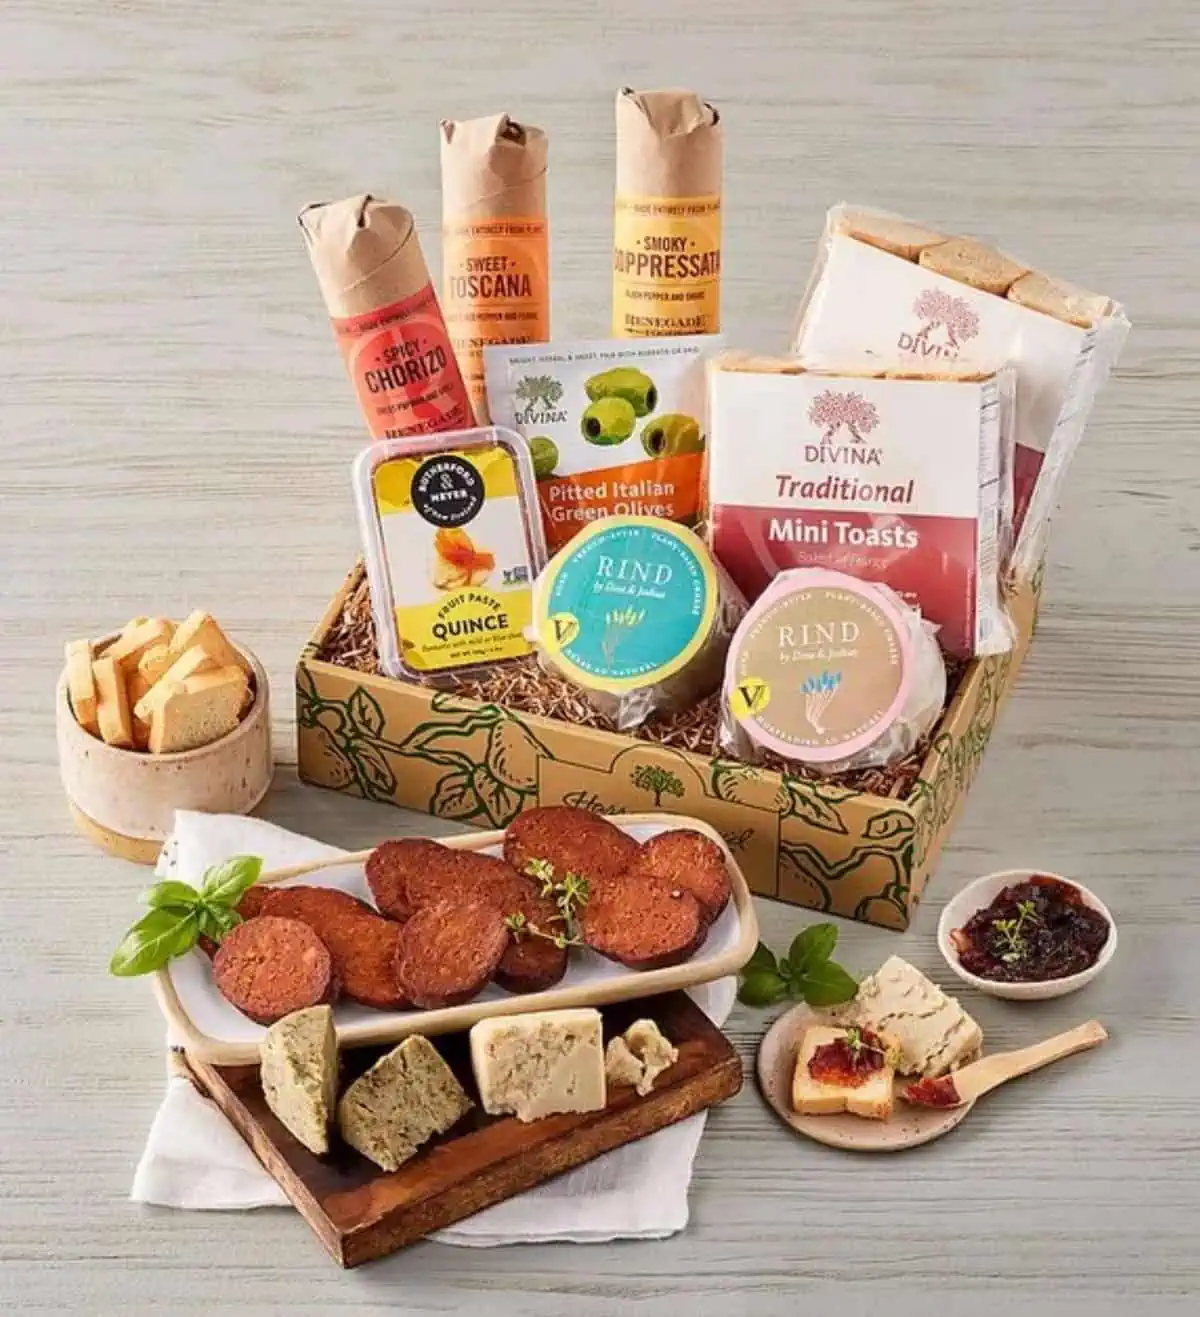 A vegan charcuterie box from Harry and David's.